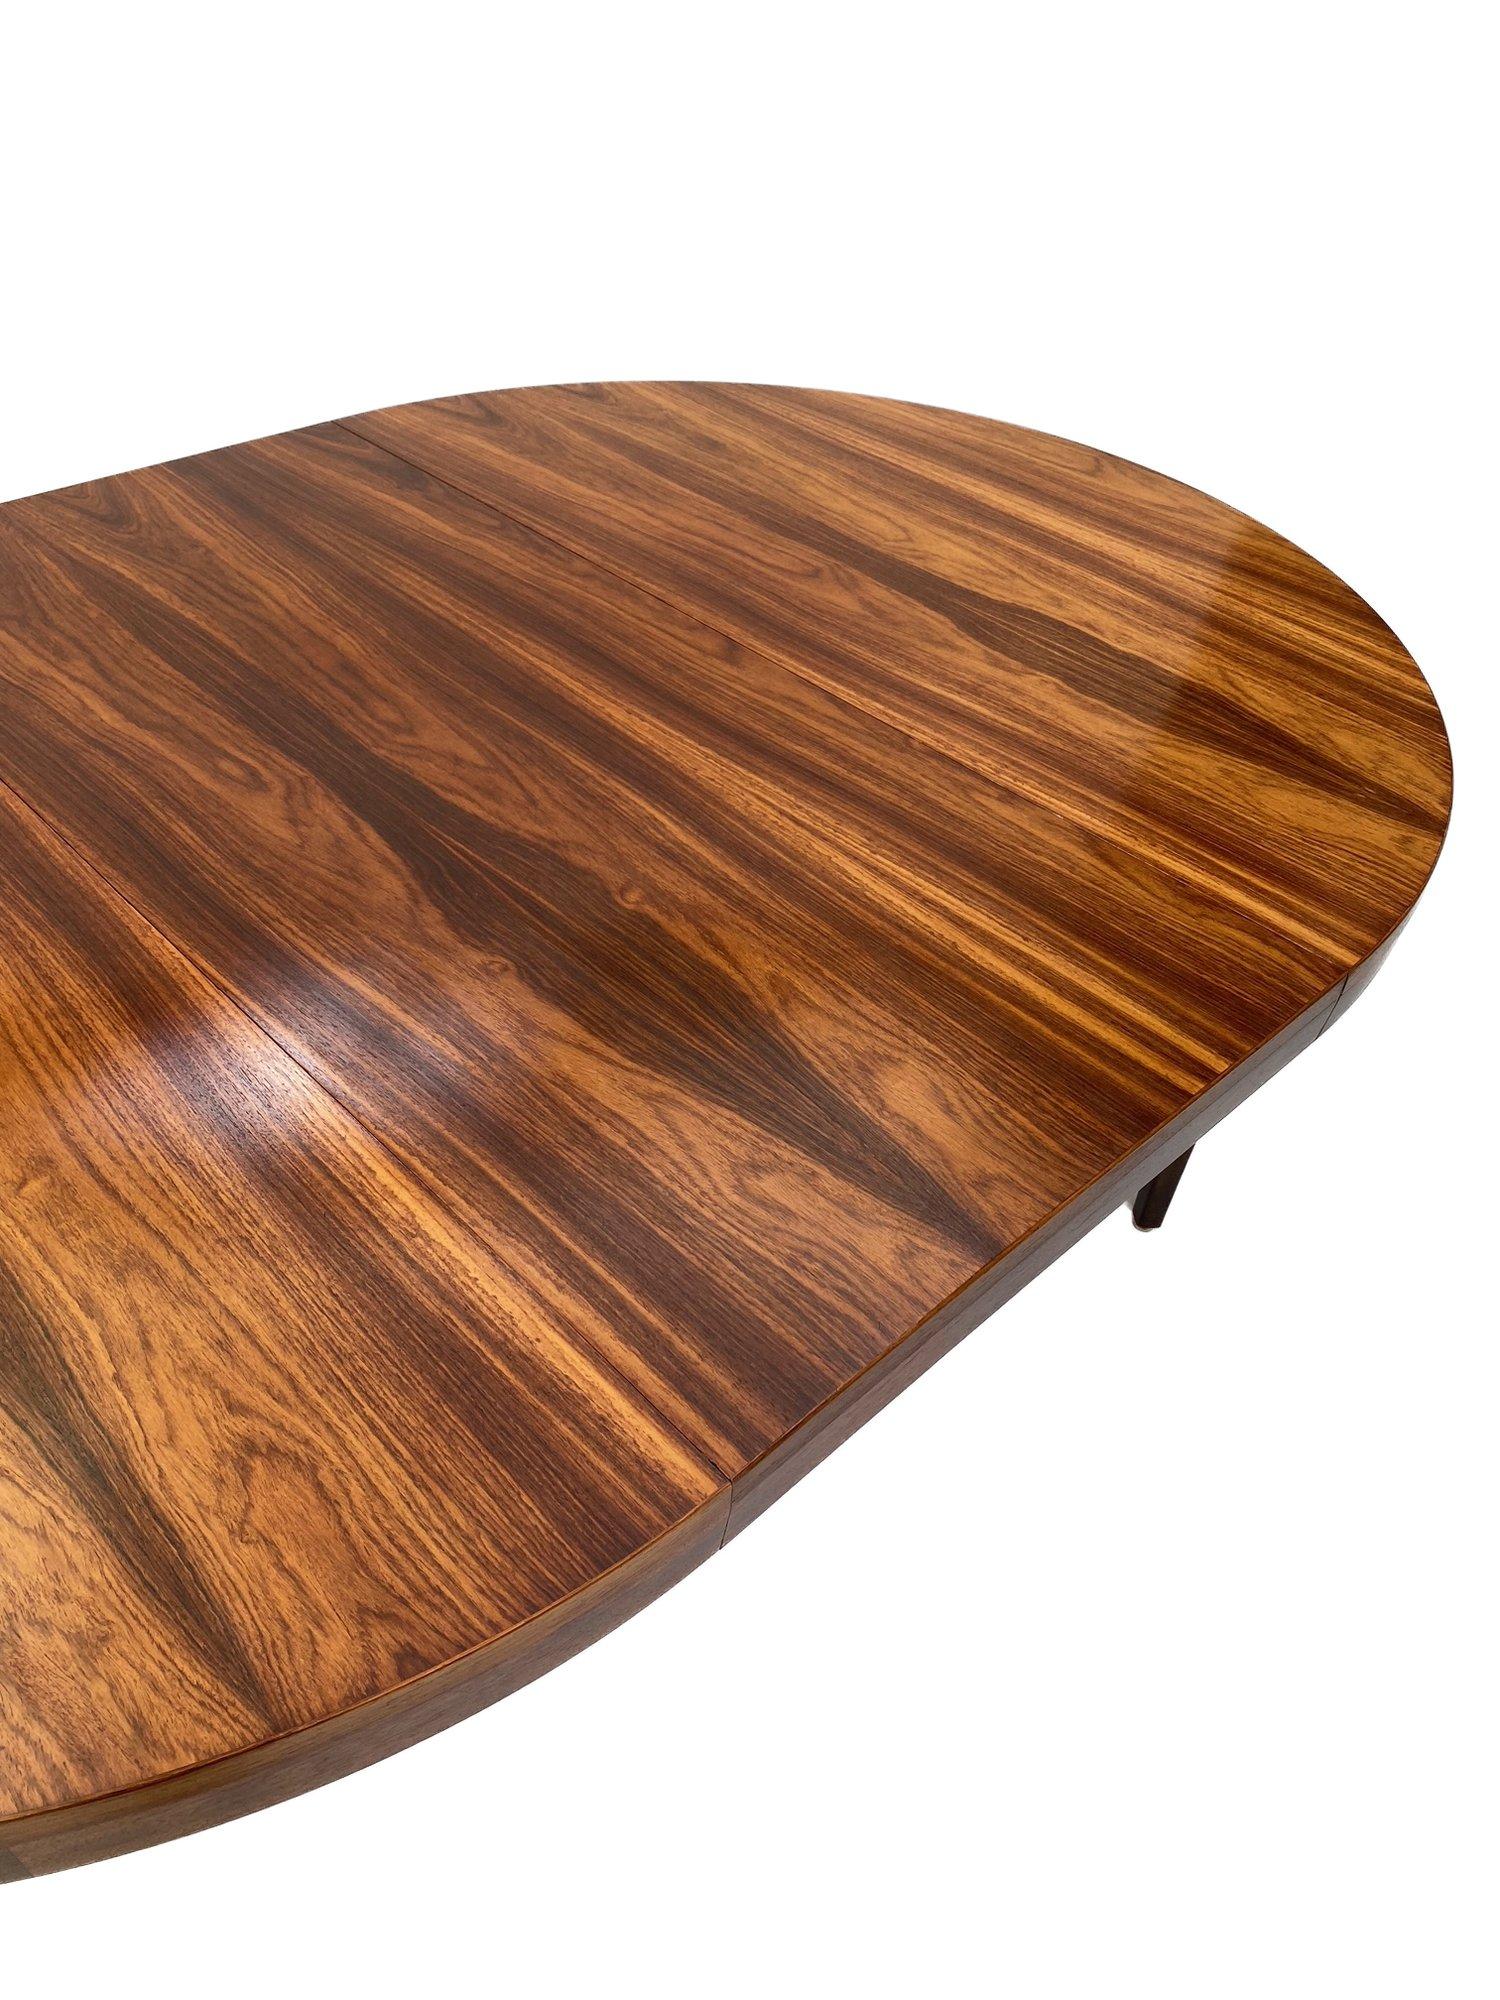 Polished Severin Hansen for Haslev Rosewood Circular Extending Dining Table, Danish 1960s